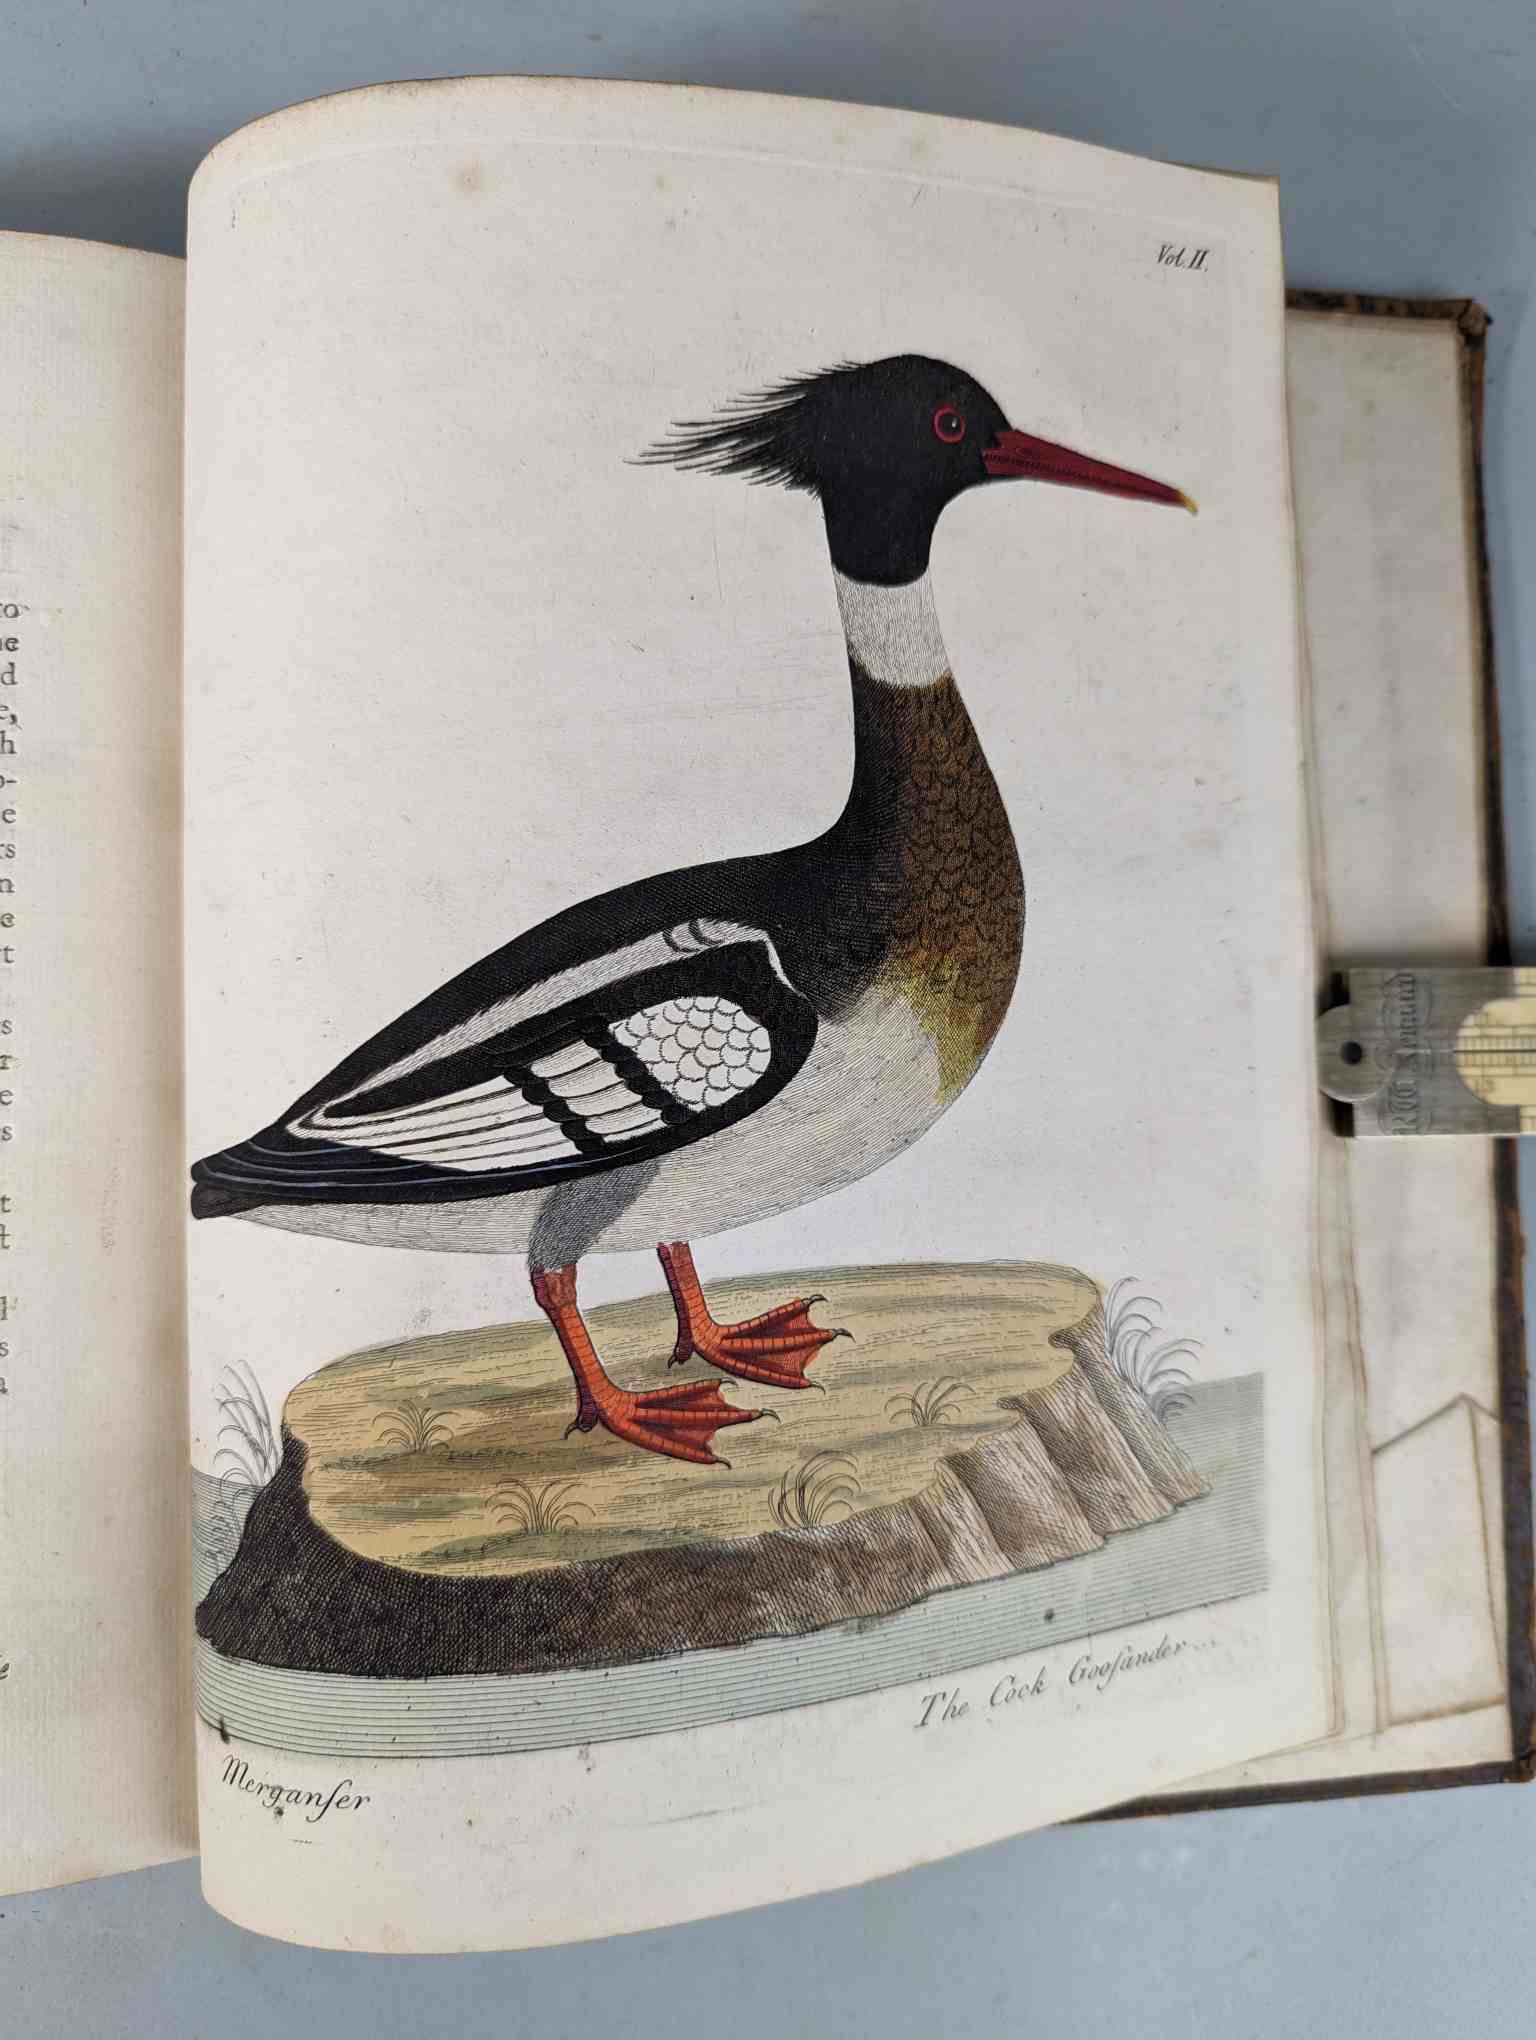 ALBIN, Eleazar. A Natural History of Birds, to which are added, Notes and Observations by W. - Image 205 of 208